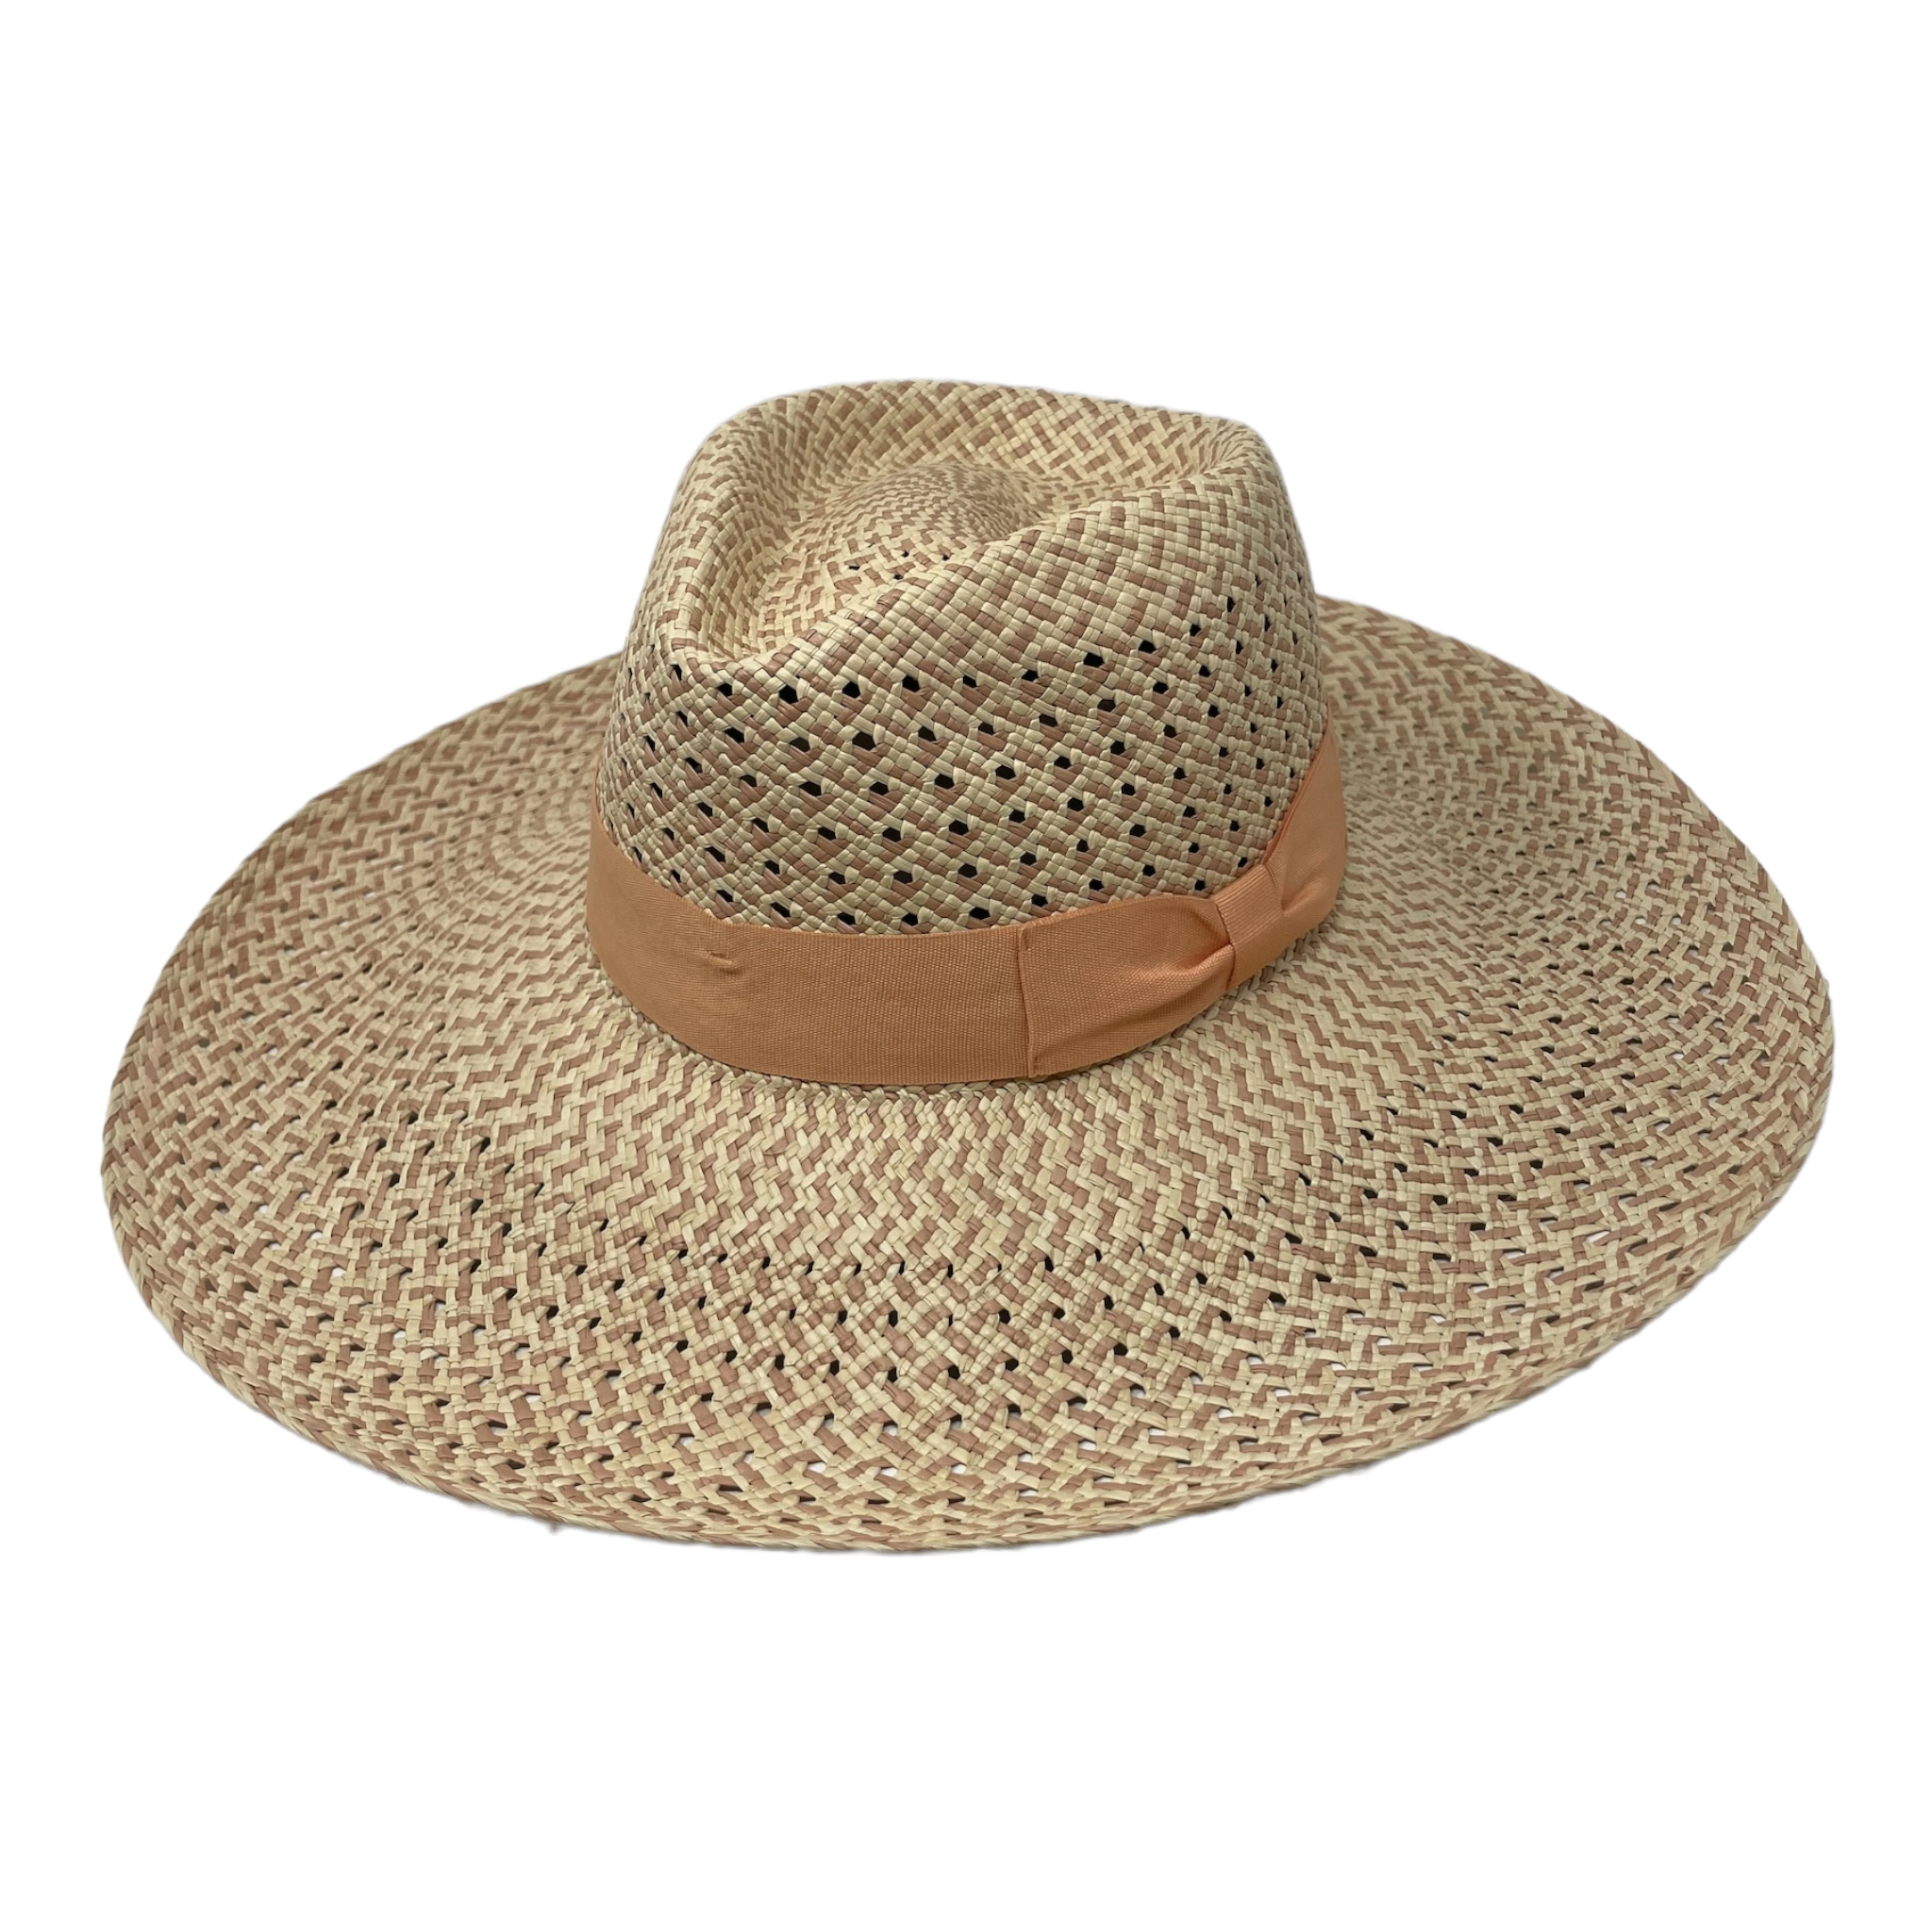 WOVEN STRAW HATS